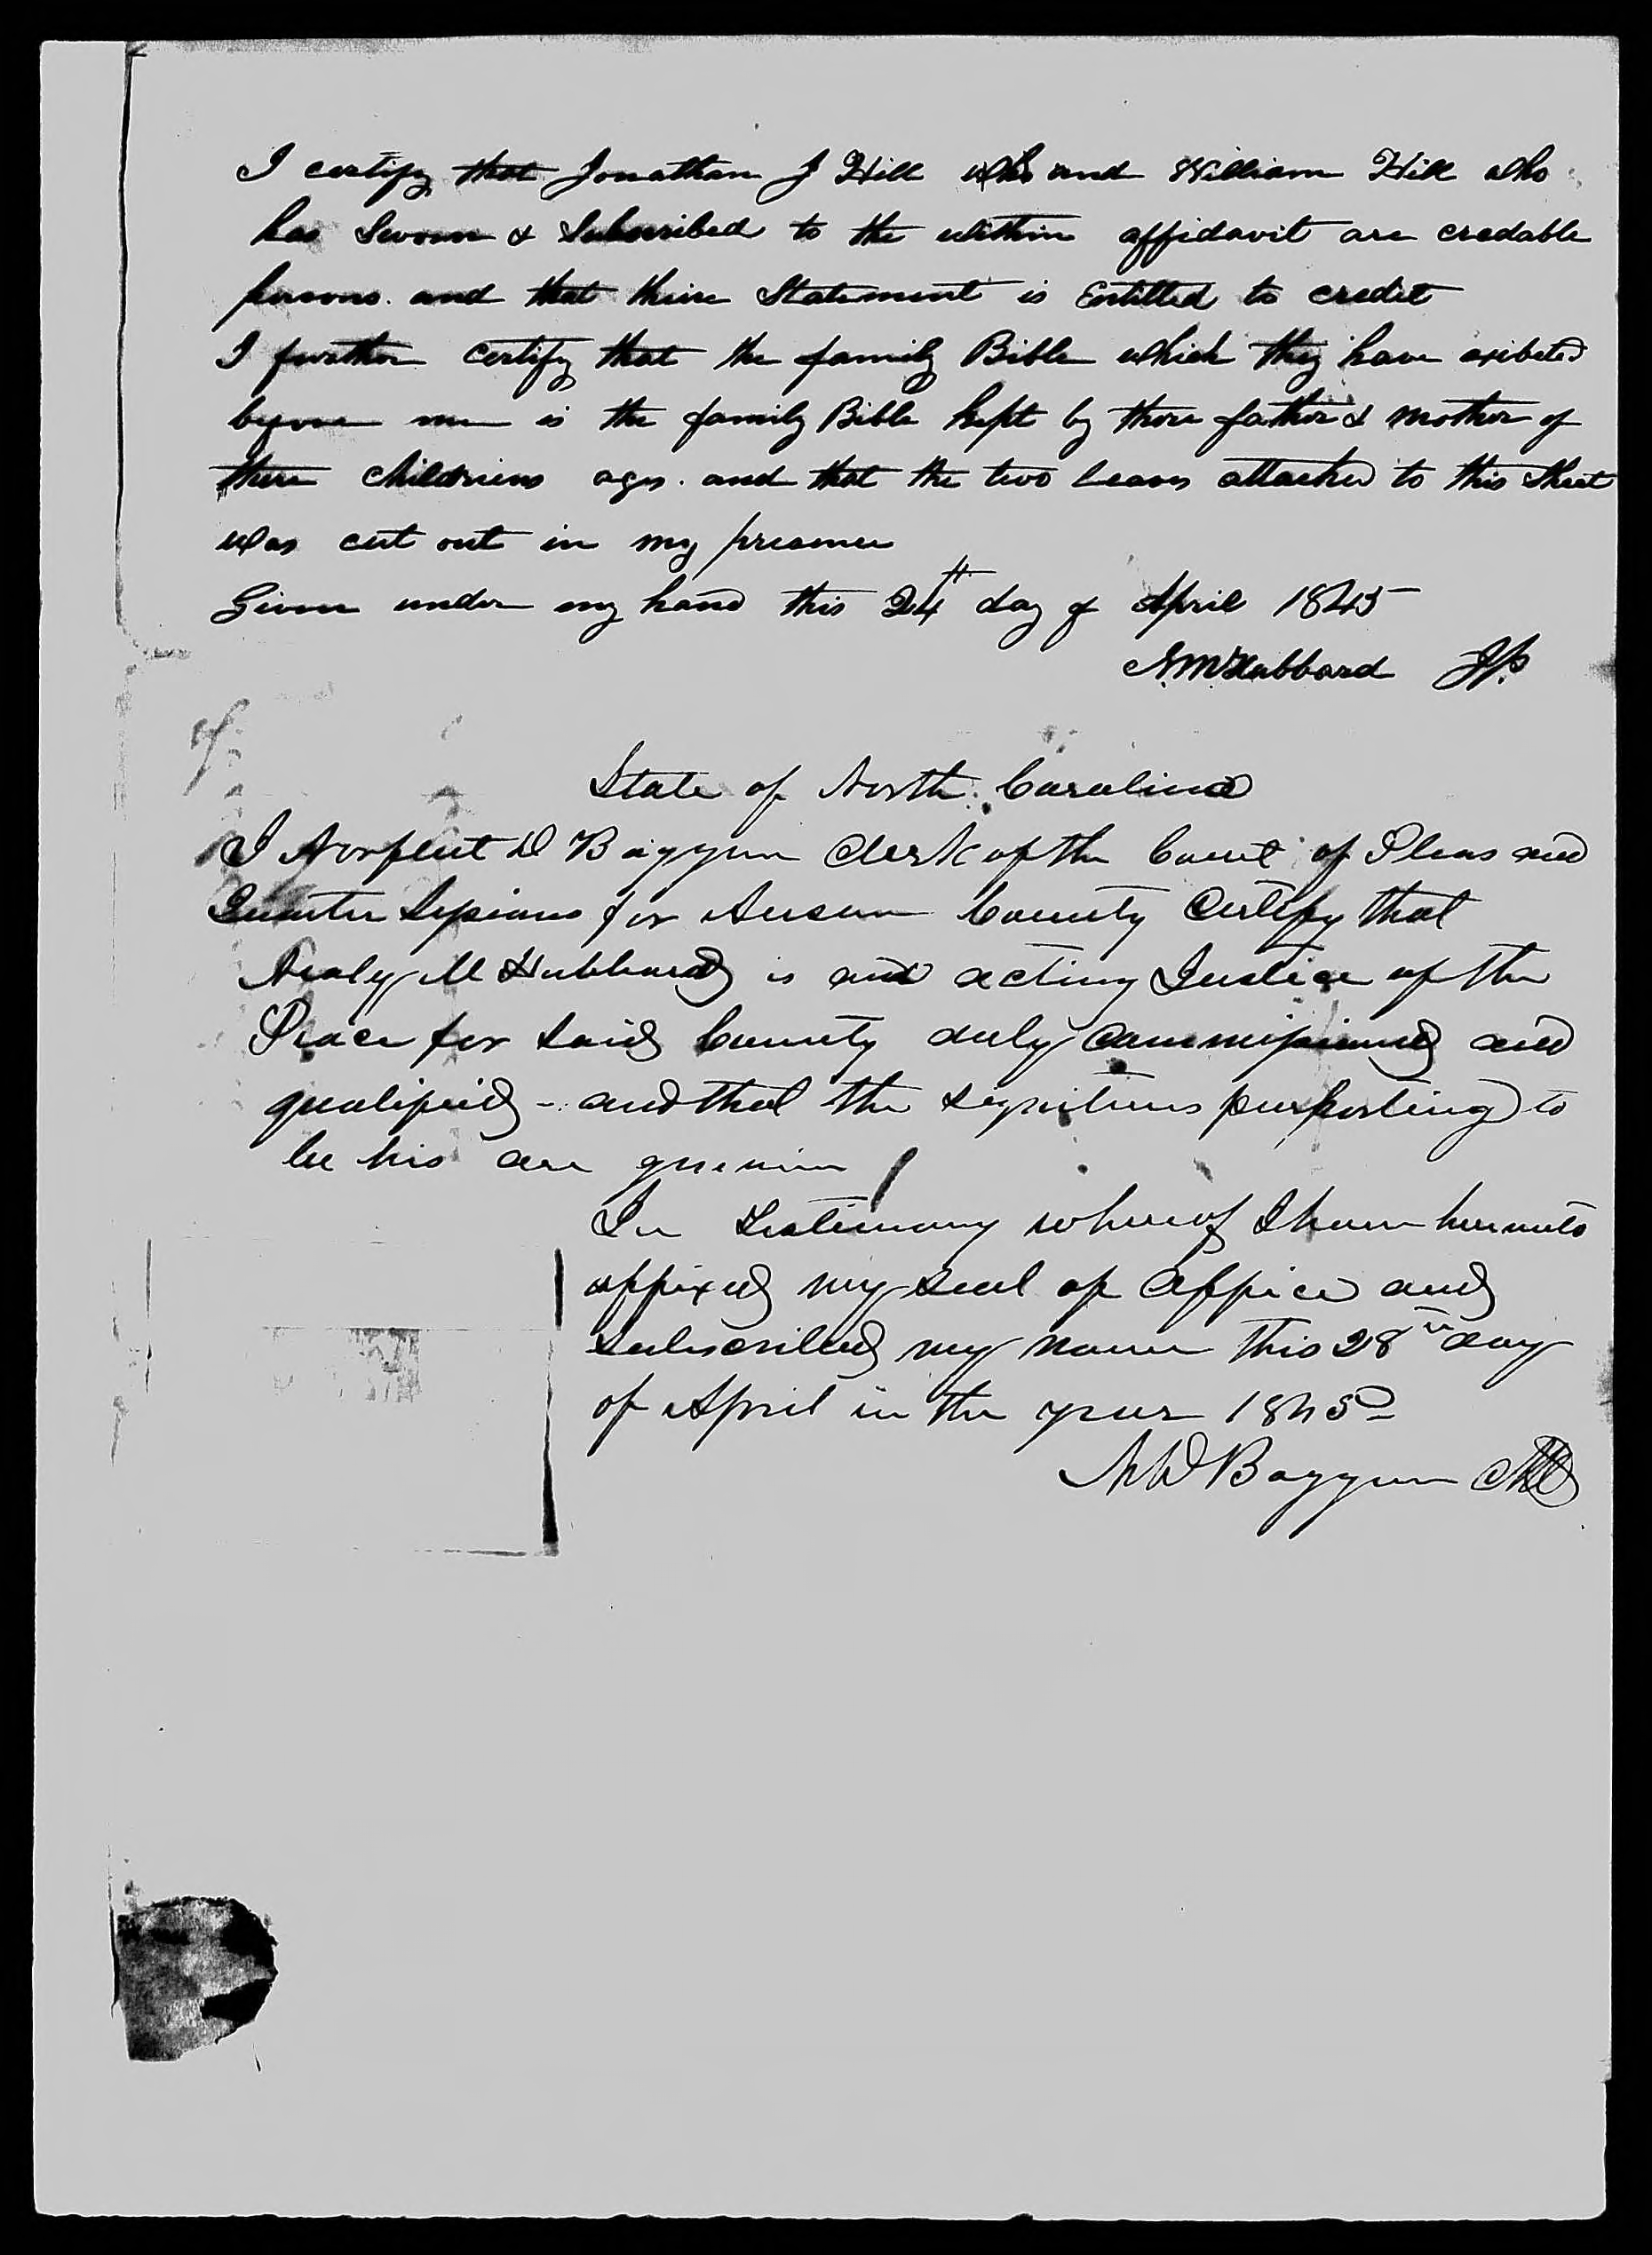 Affidavit of Jonathan J. Hill and William Hill in support of a Pension Claim for Huldah Hill, 24 April 1845, page 2